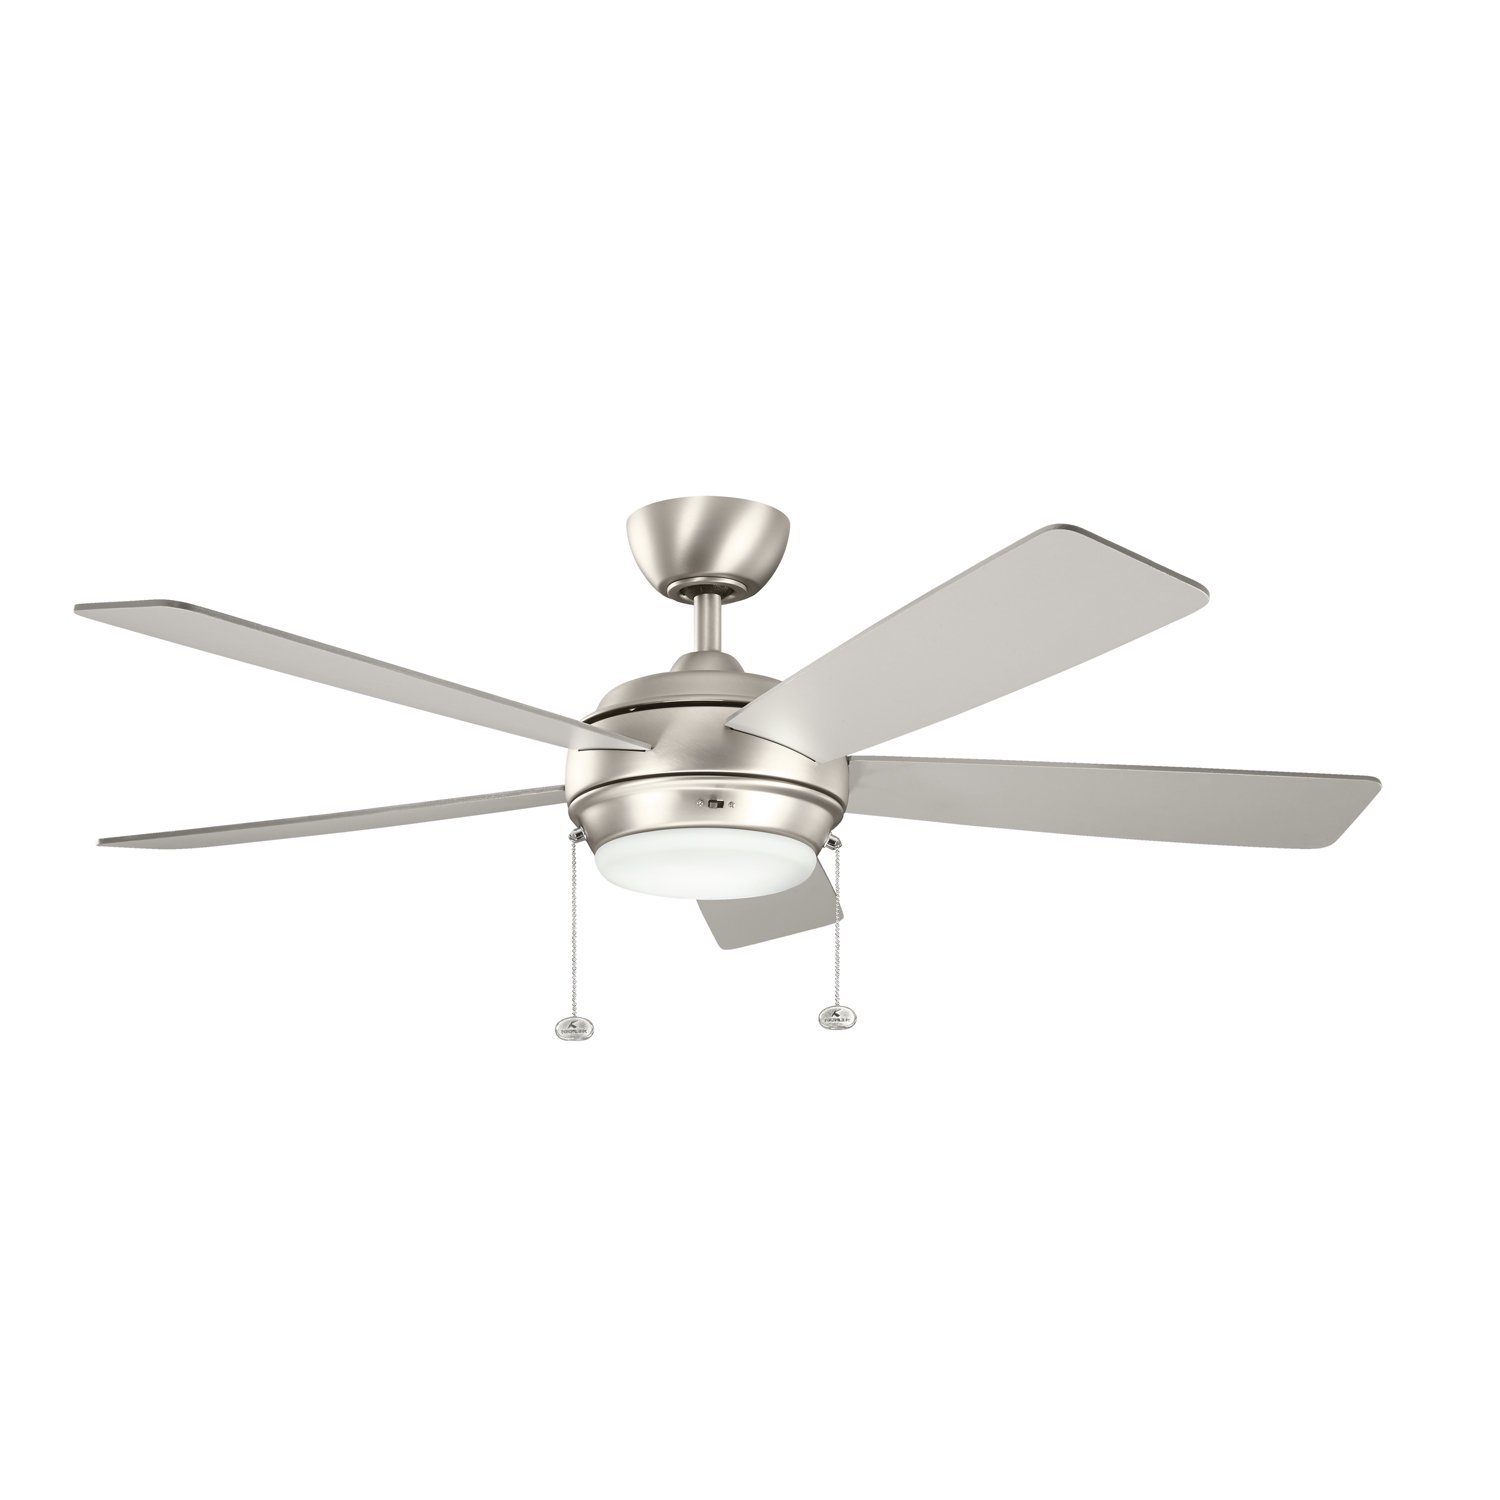 Kichler Lighting 300173NI Starkk 52IN Ceiling Fan, Brushed Nickel Finish with Reversible Silver/Walnut Blades and Satin Etched Glass Downlight